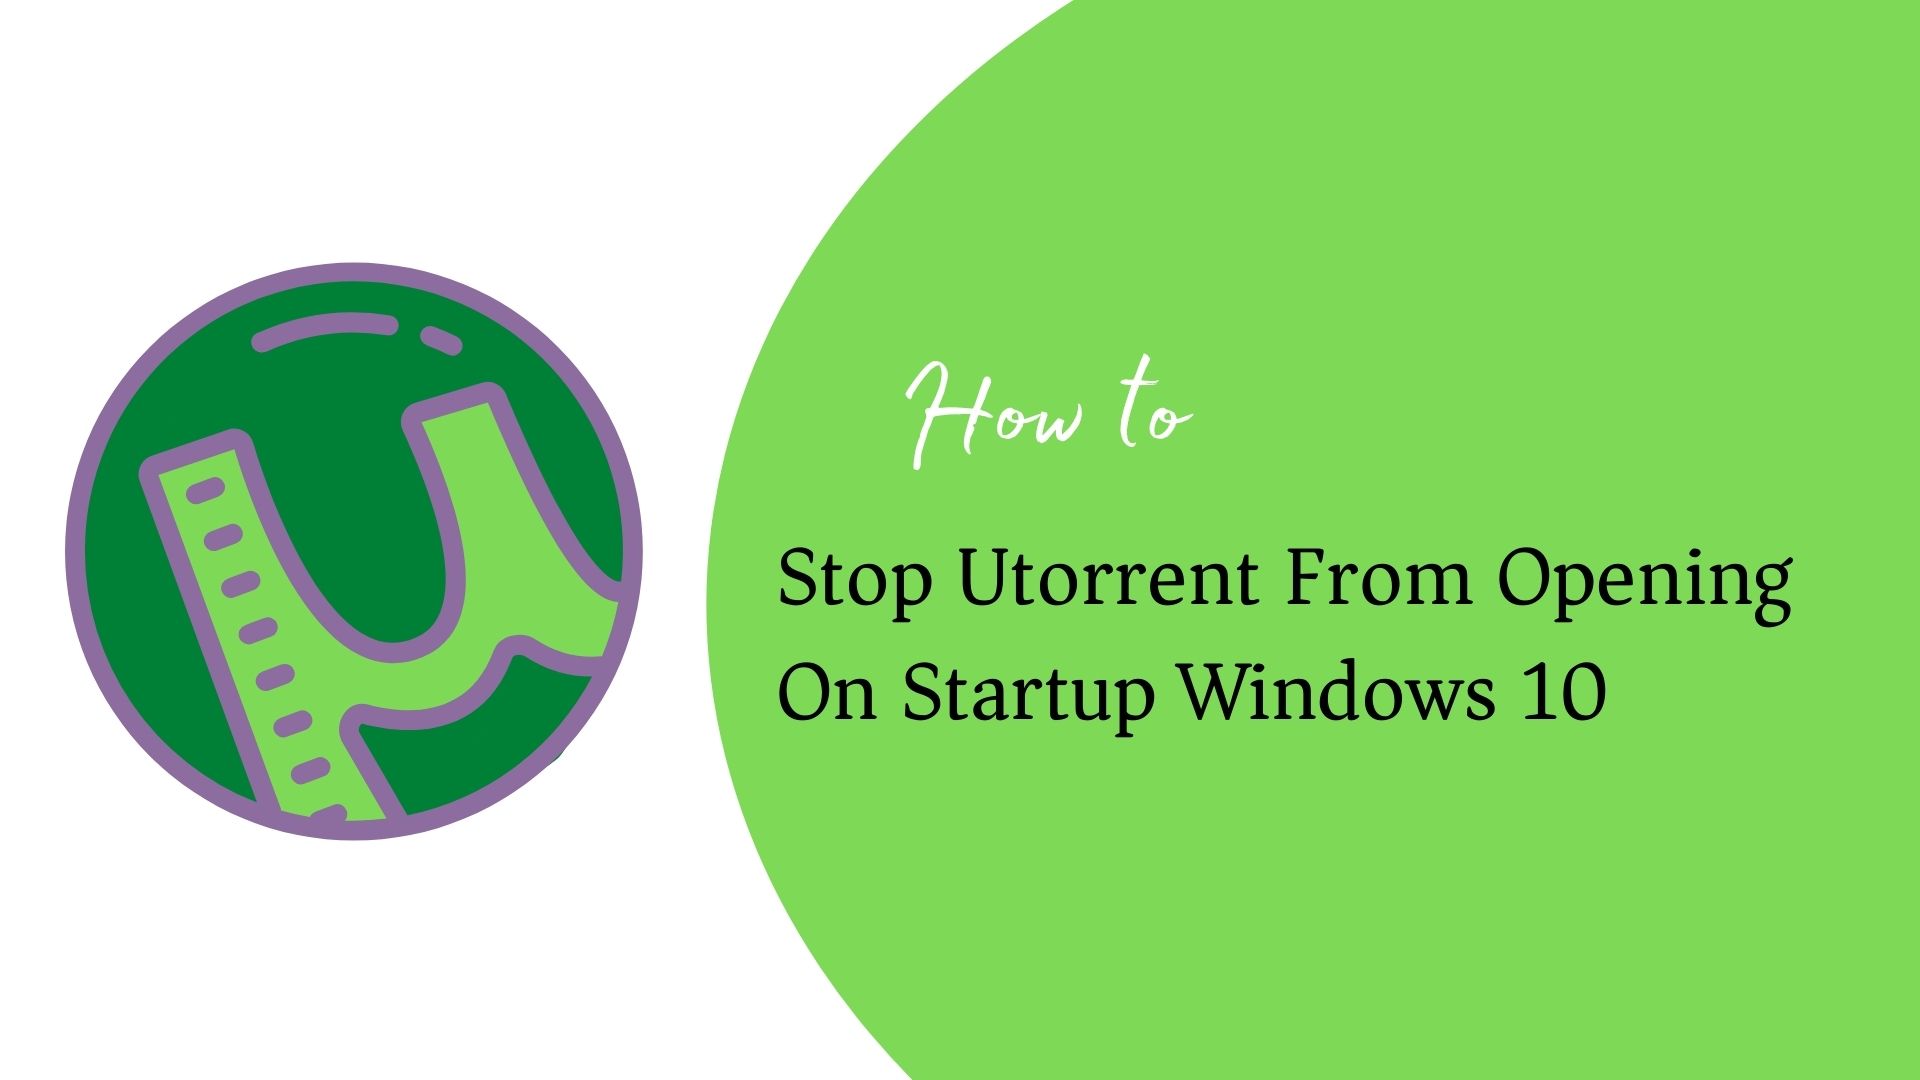 Stop Utorrent From Opening On Startup